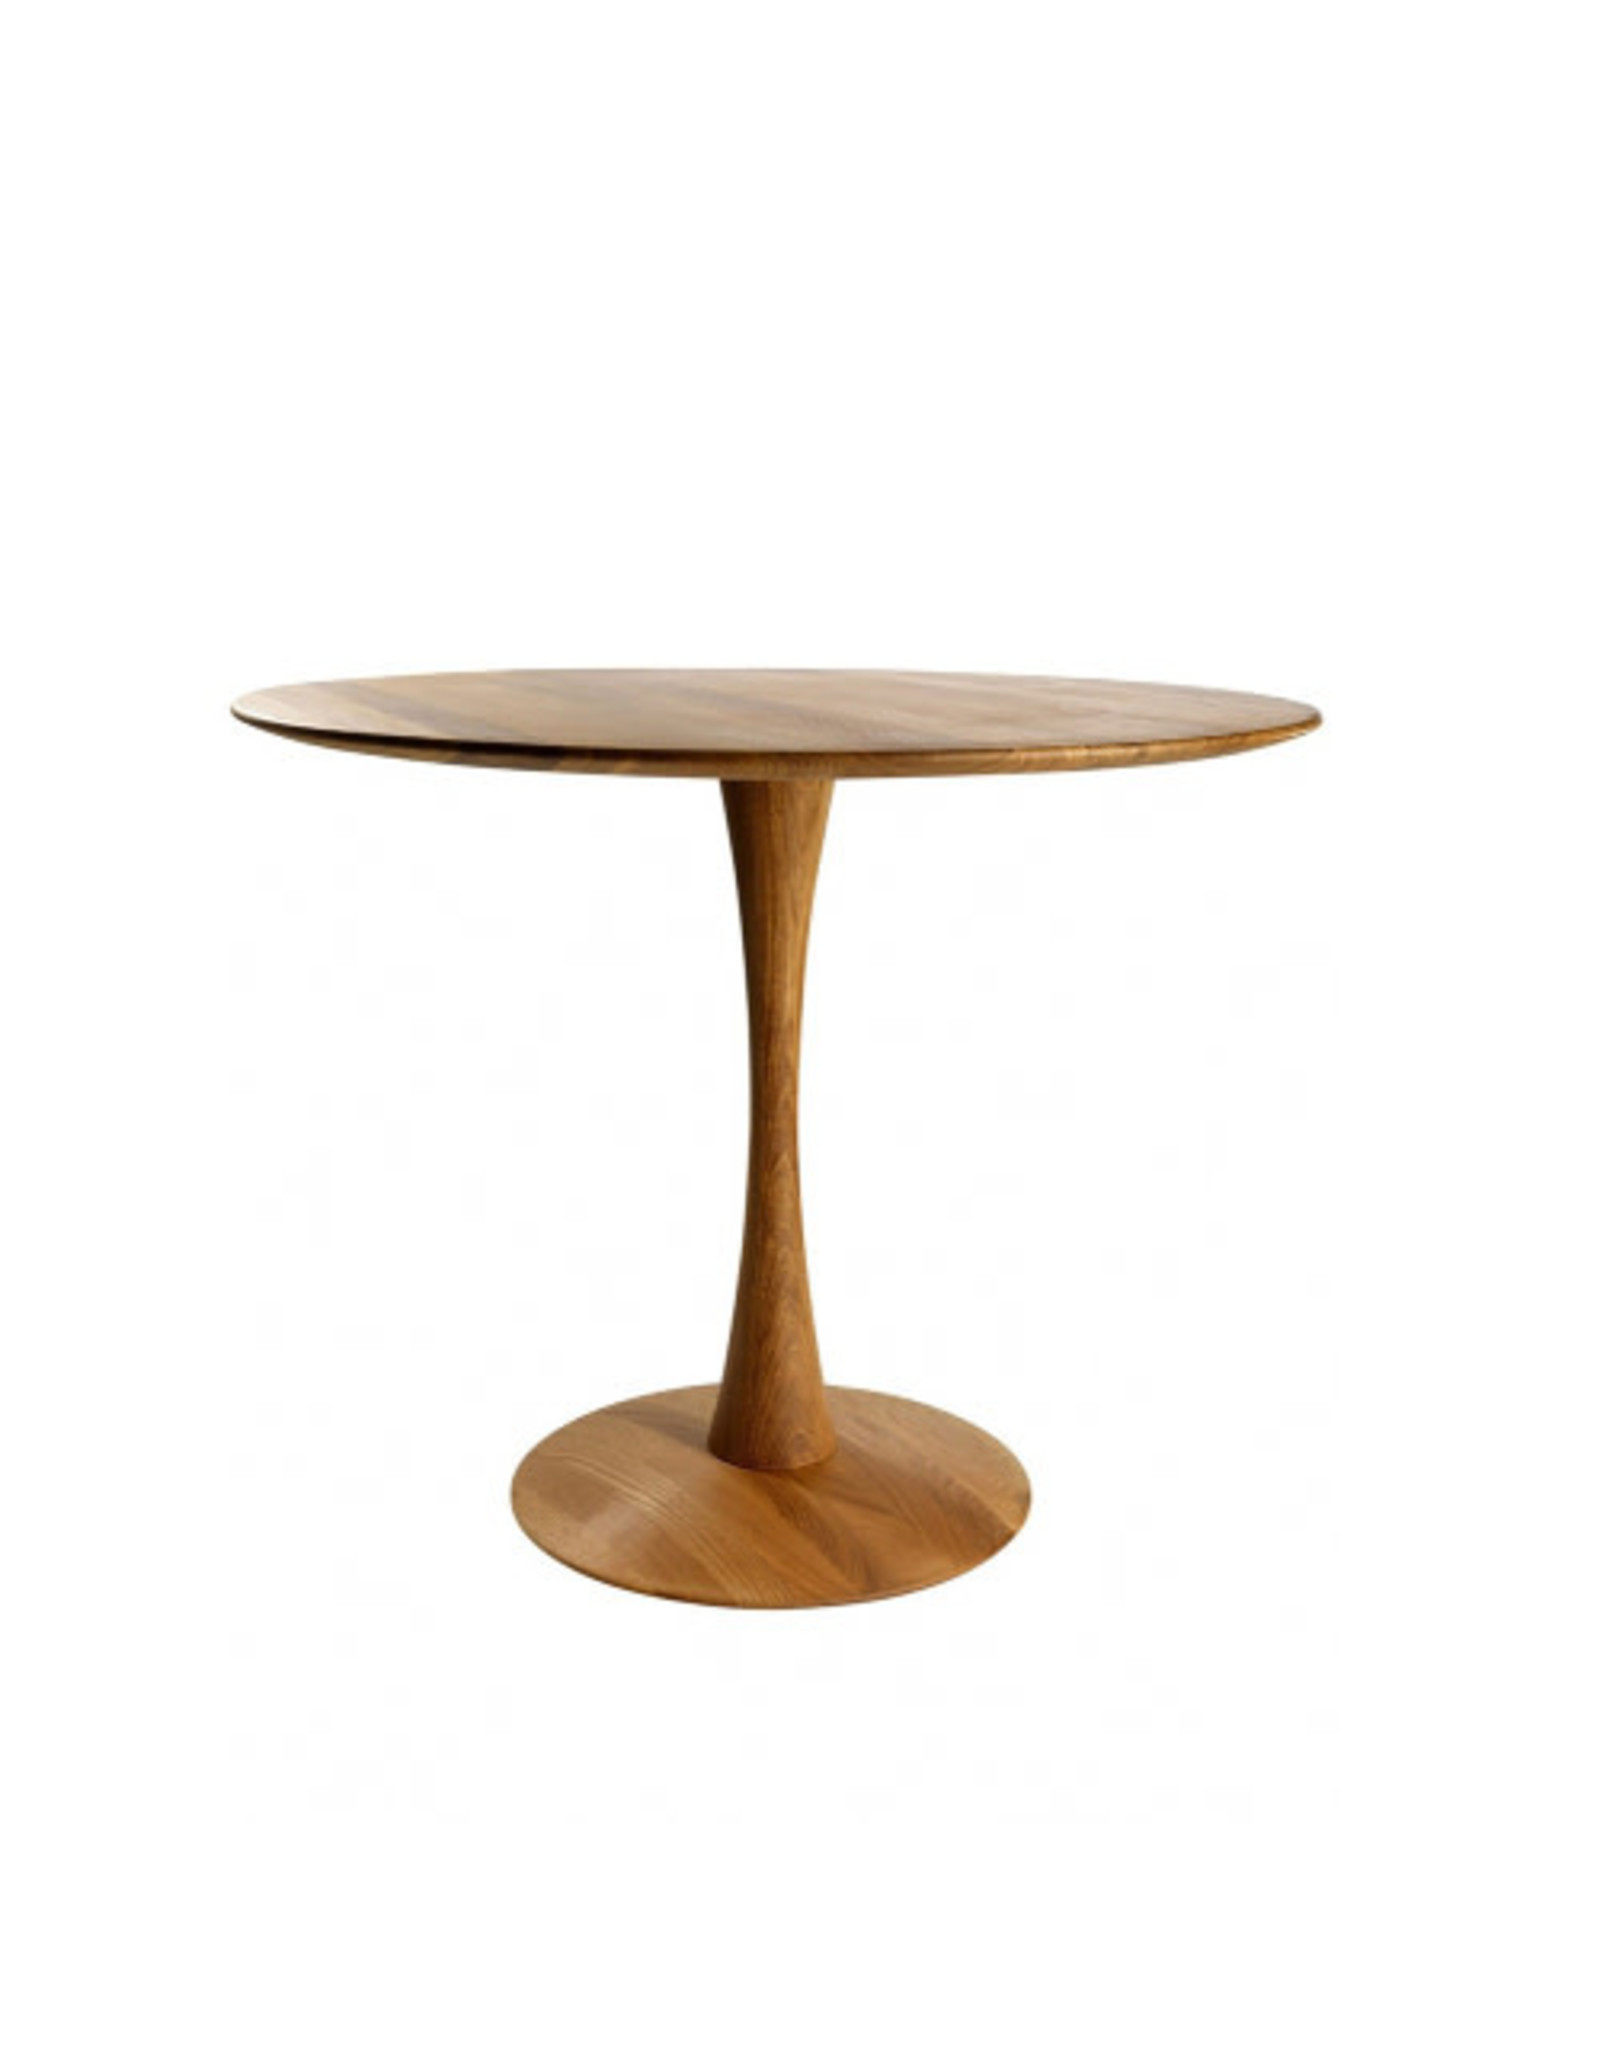 ND109 100T TRISSE TABLE IN SOLID WALNUT